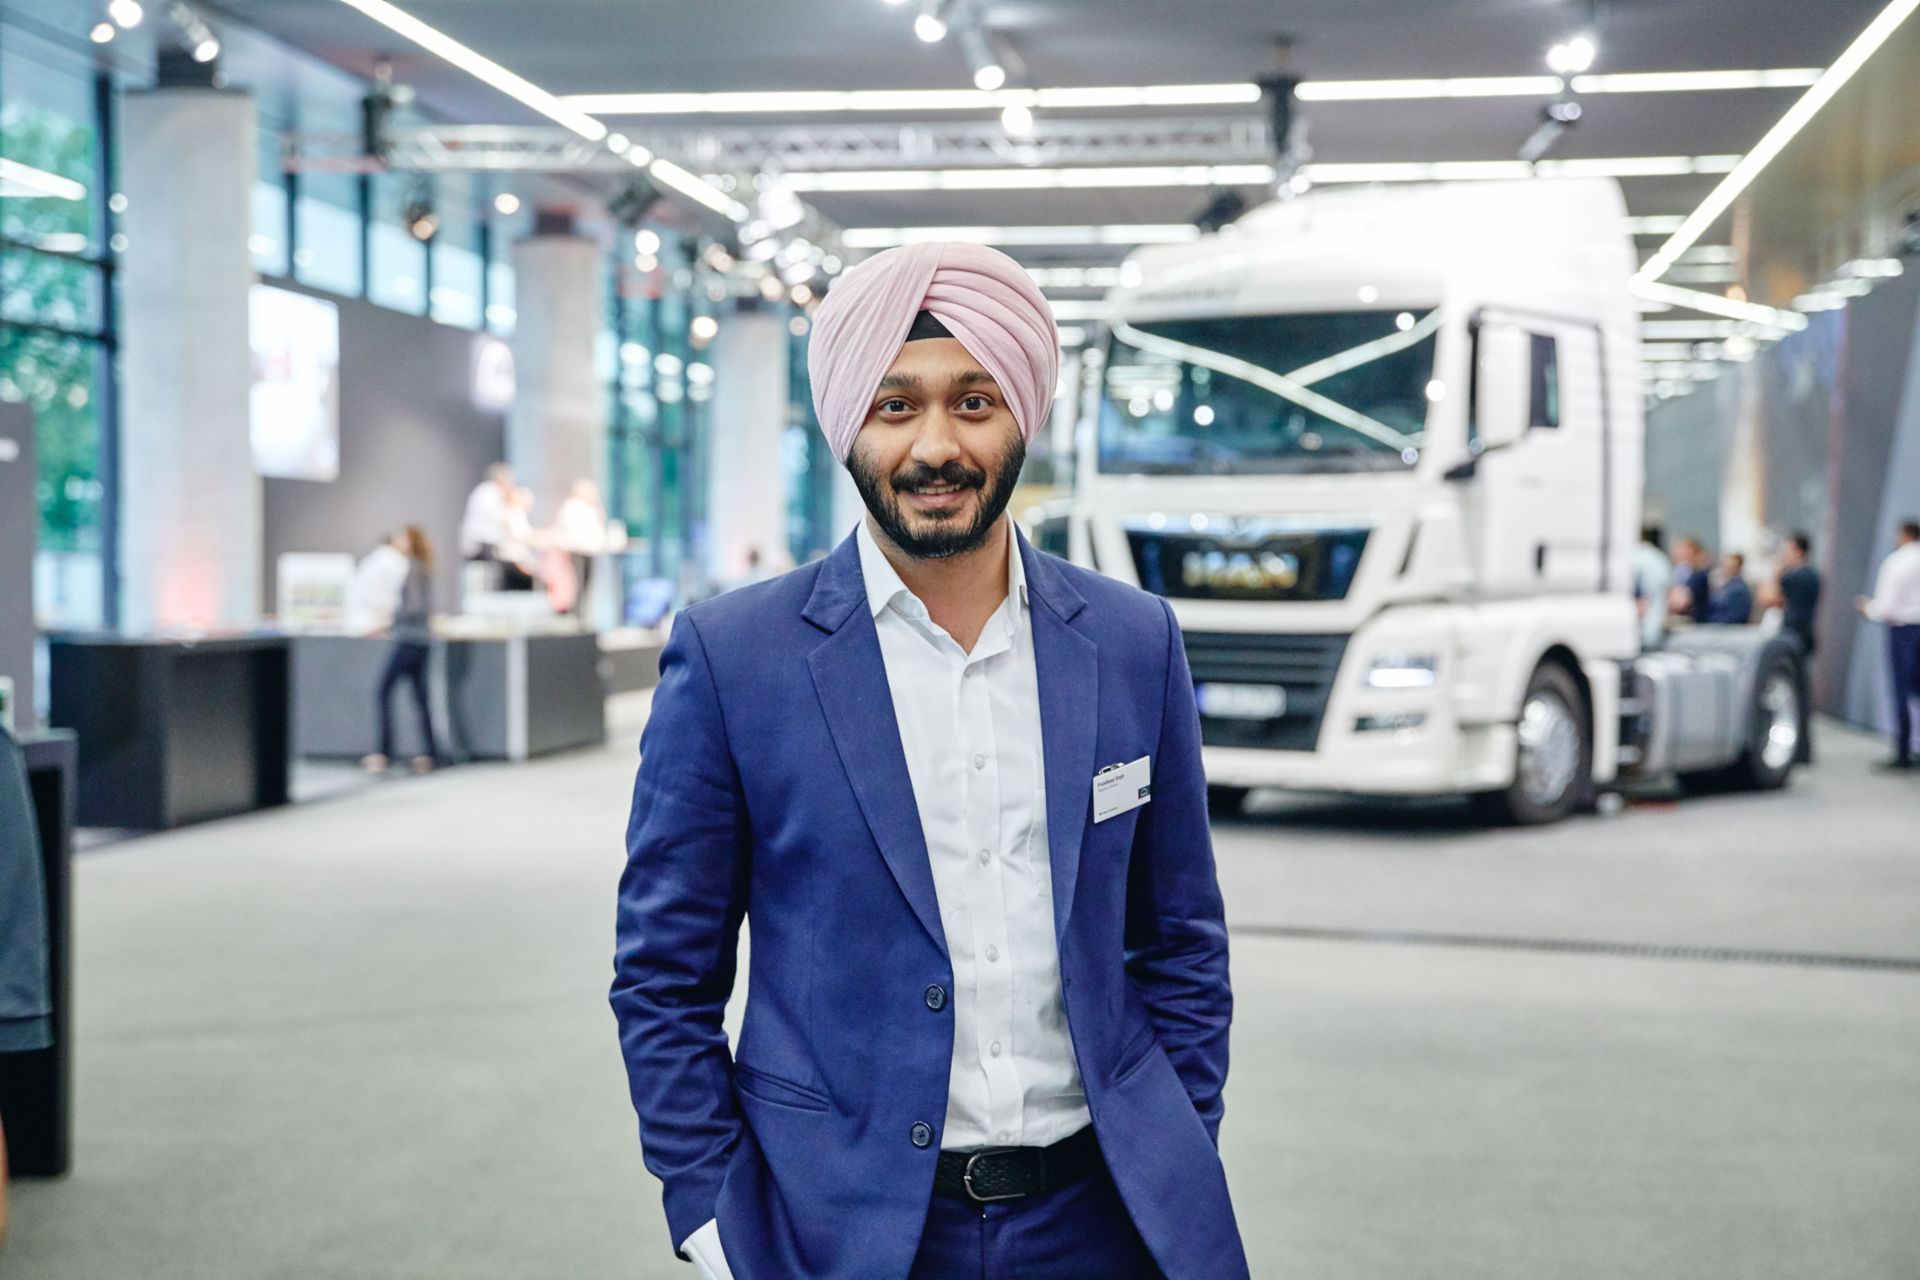 Prabhdeep Singh, one of the three founders of Stanplus, standing in a brightly lit hall in front of a MAN truck.